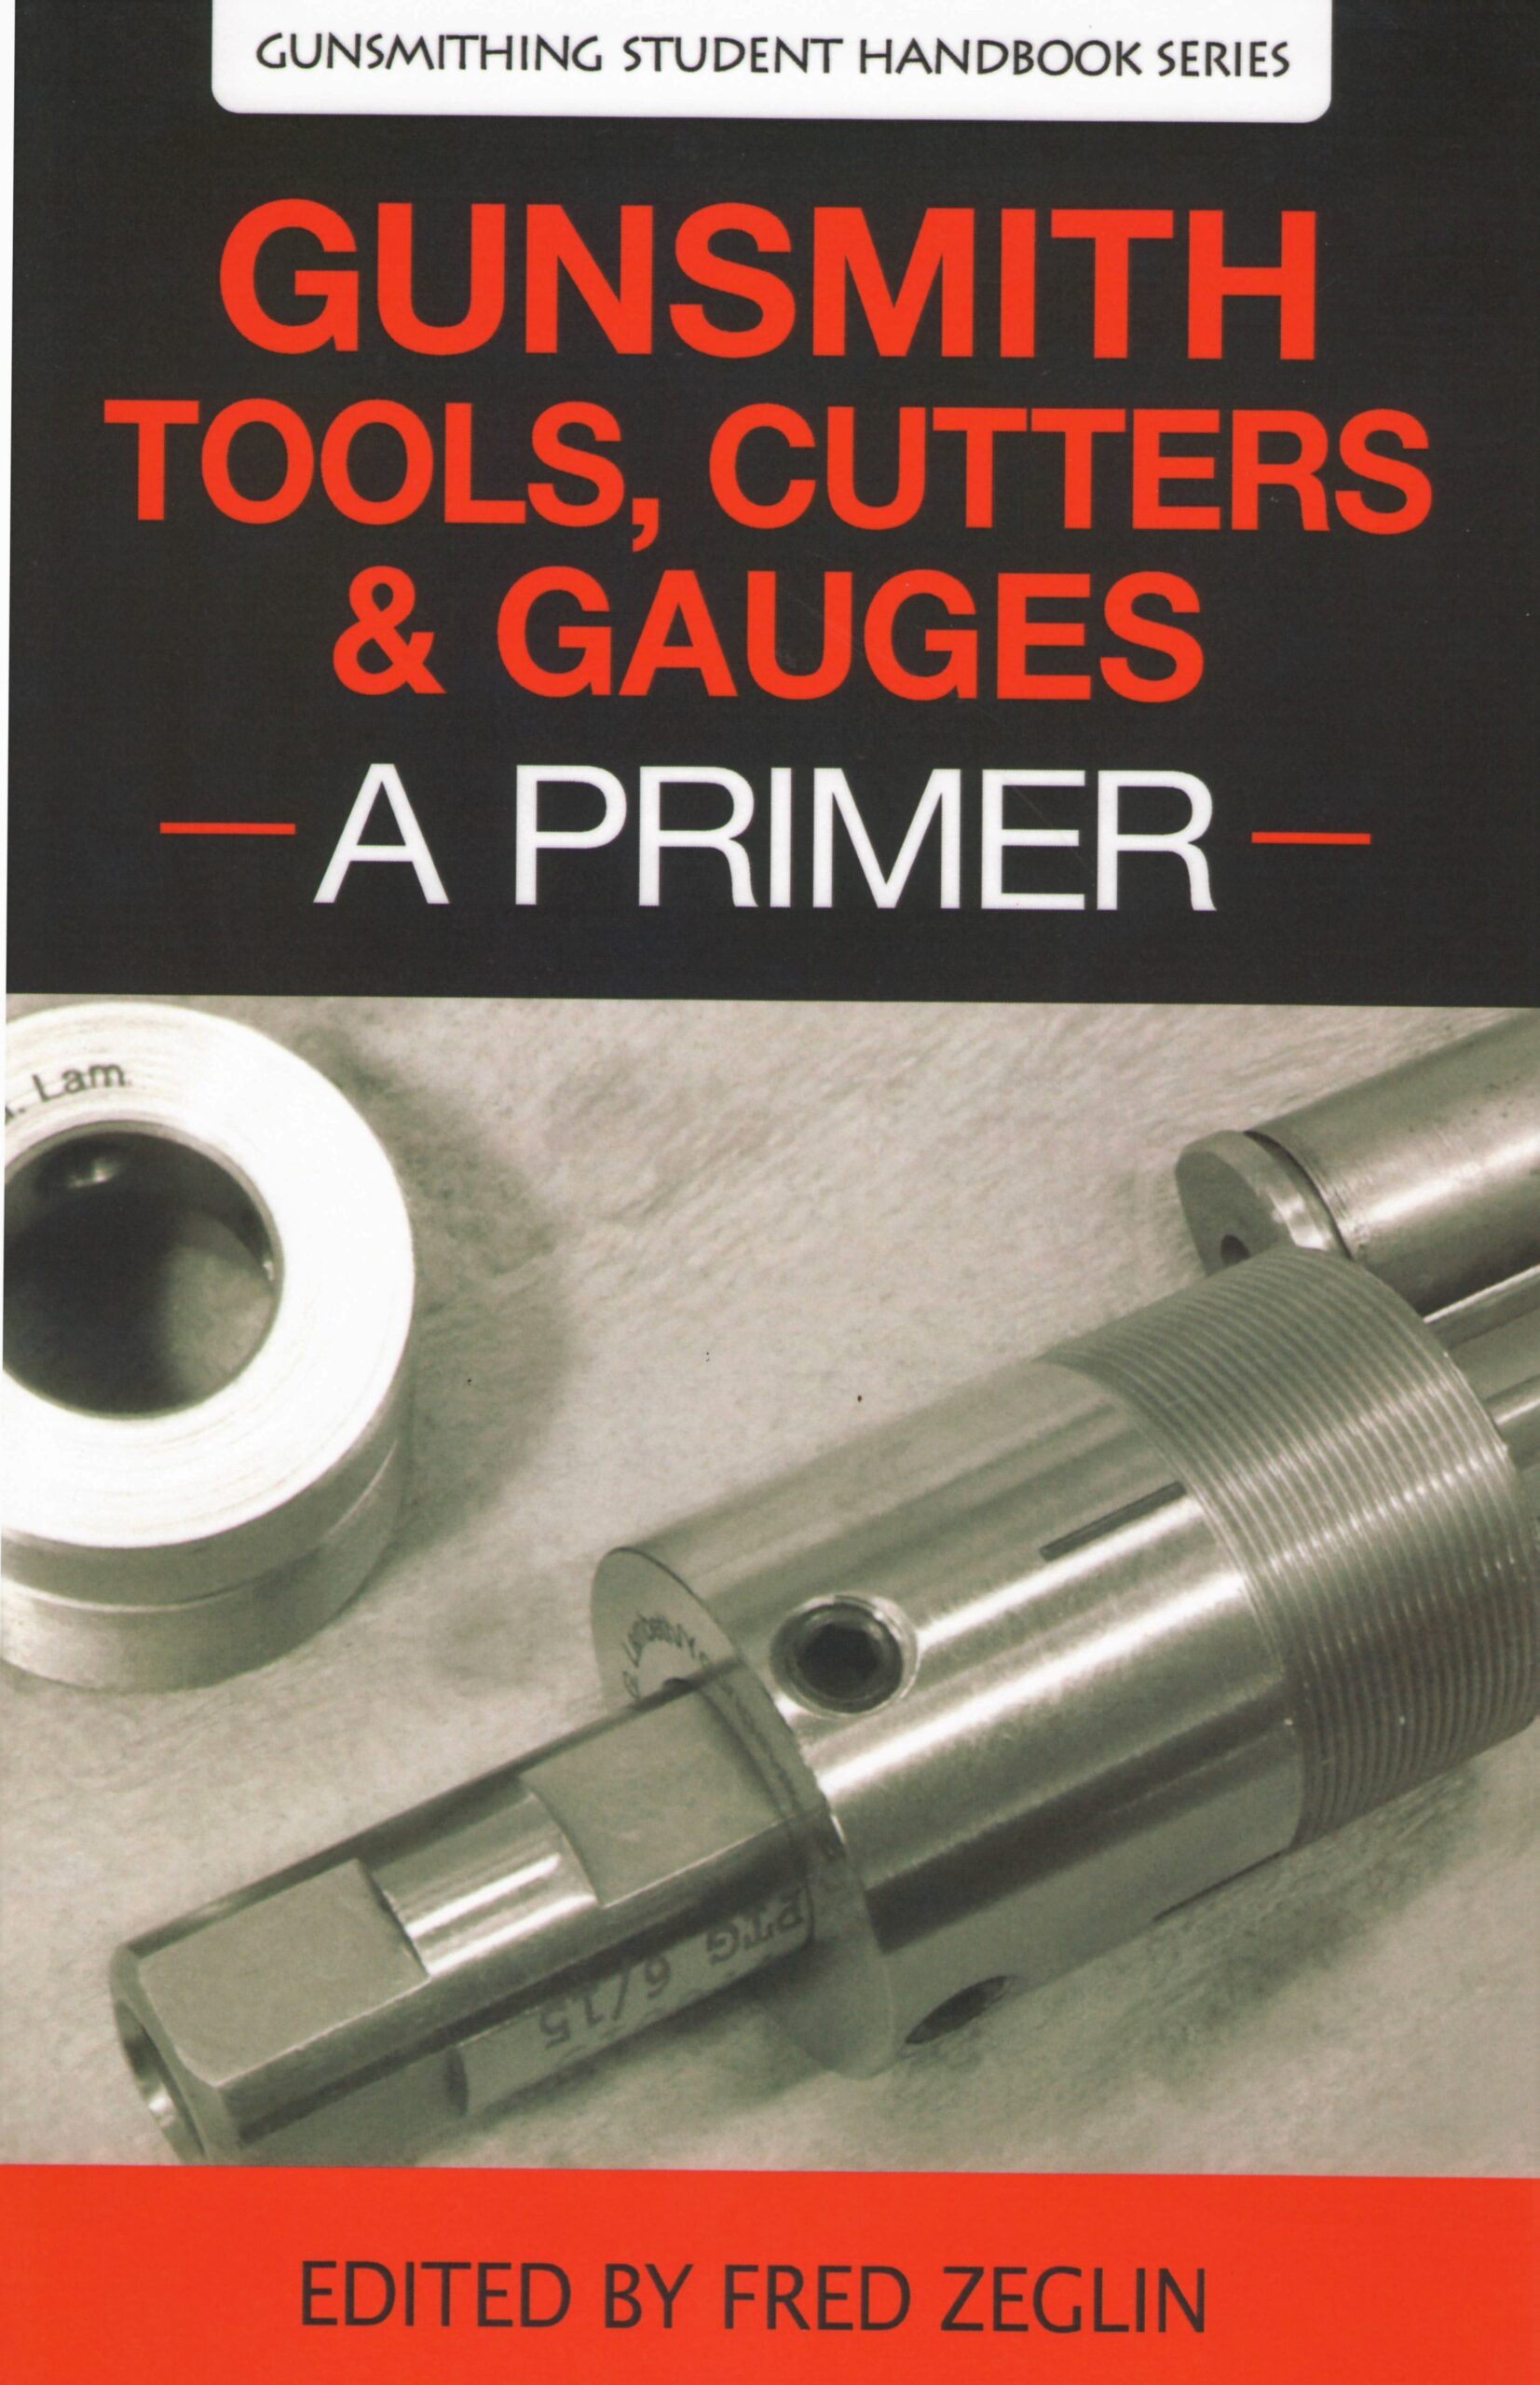 Gunsmith Tools, Cutters & Guages - A Primer